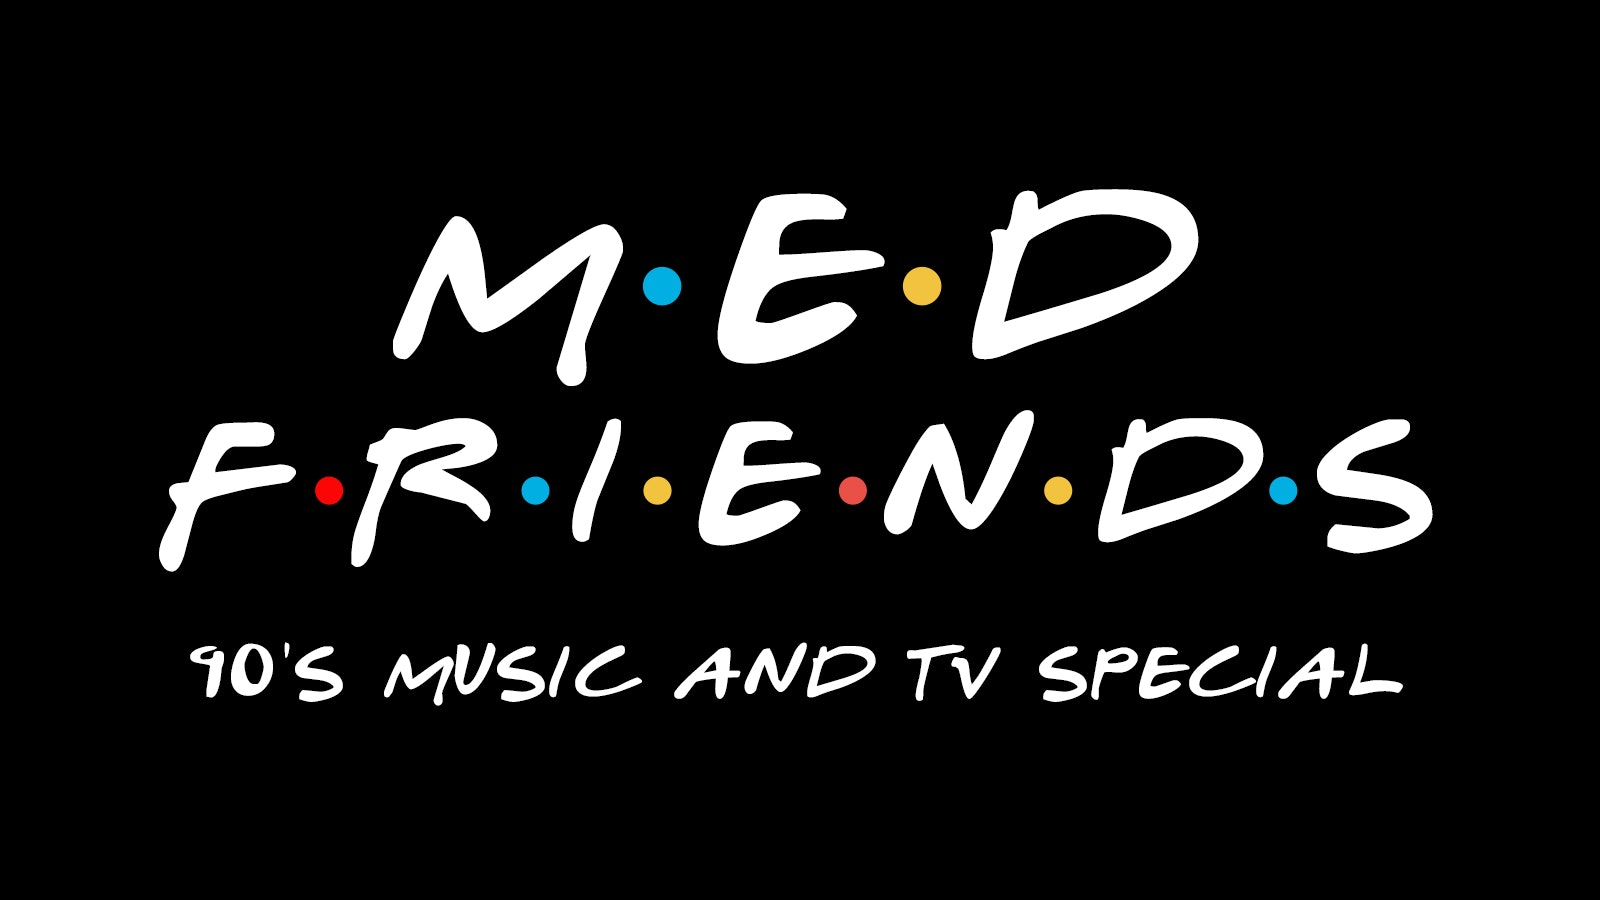 MEDICATION – FRIENDS 90’S SPECIAL